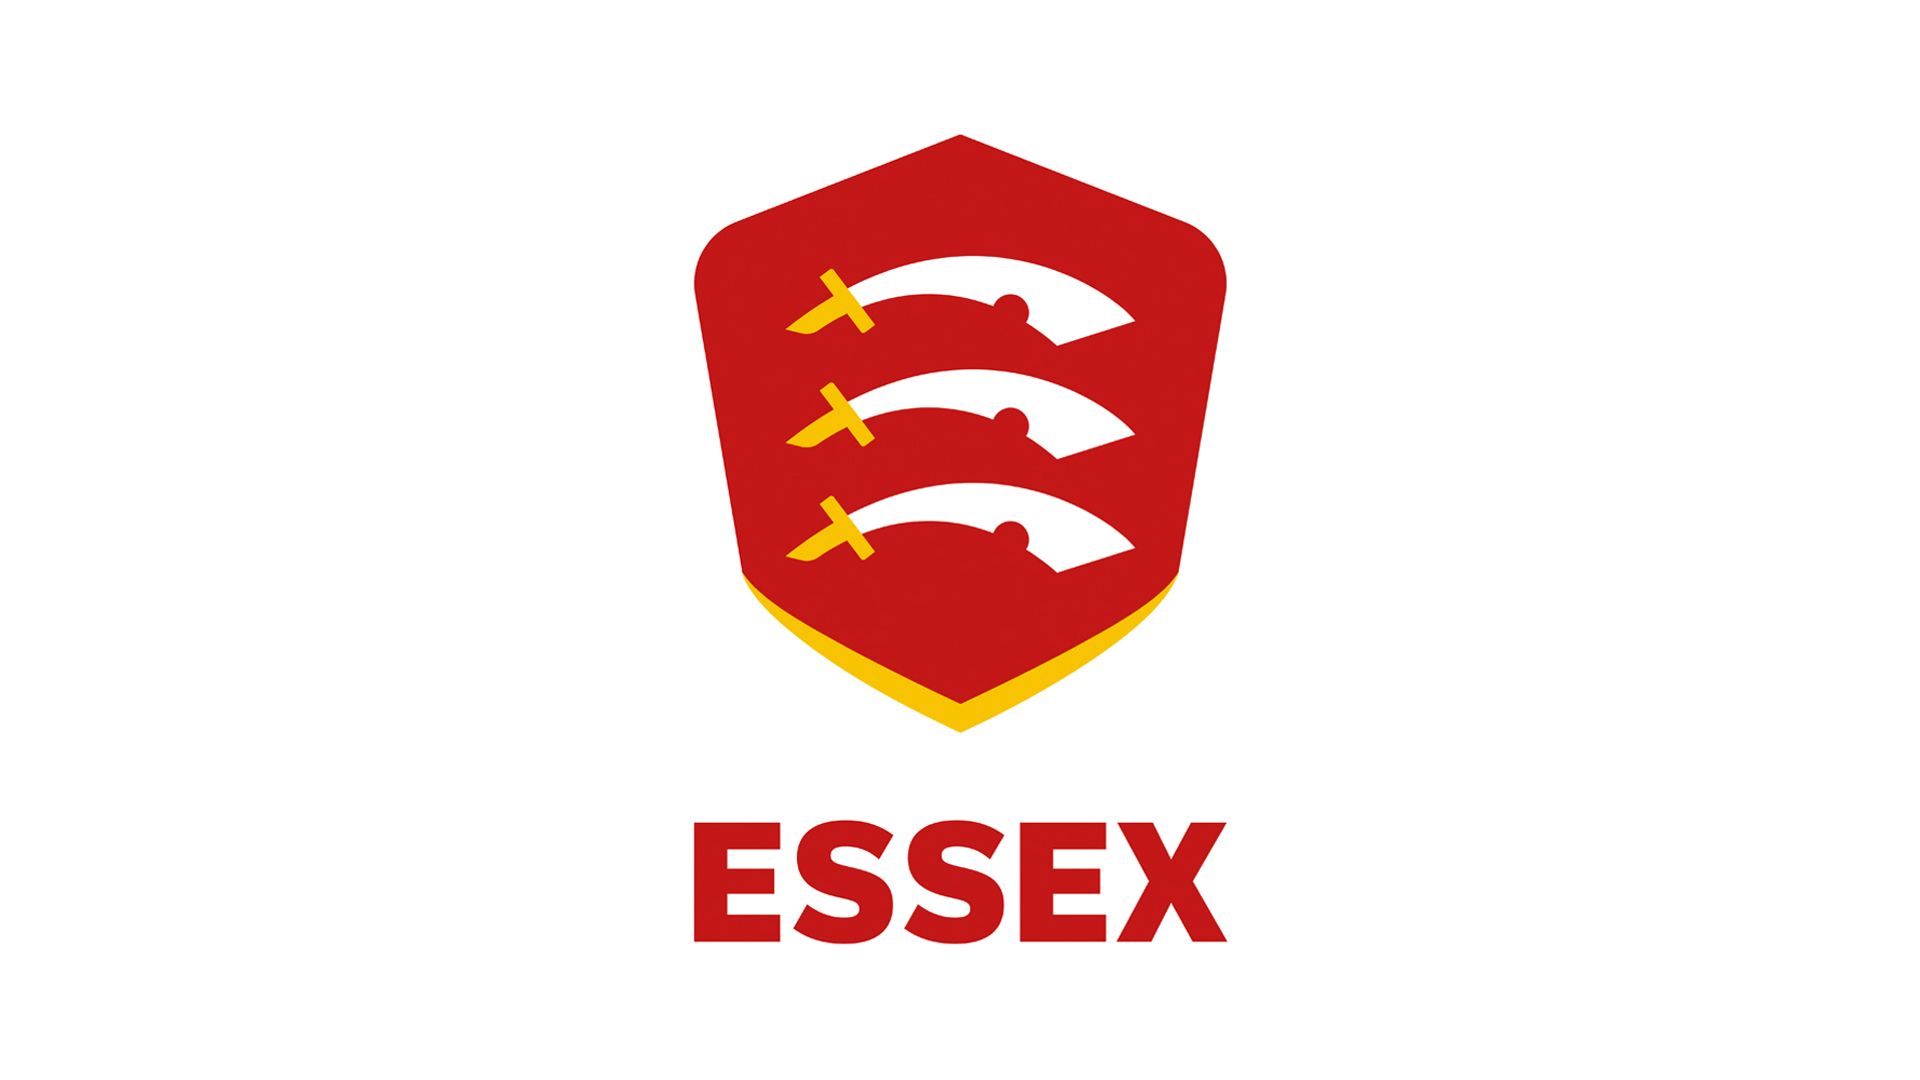 Essex receive long-awaited report into allegations of racism